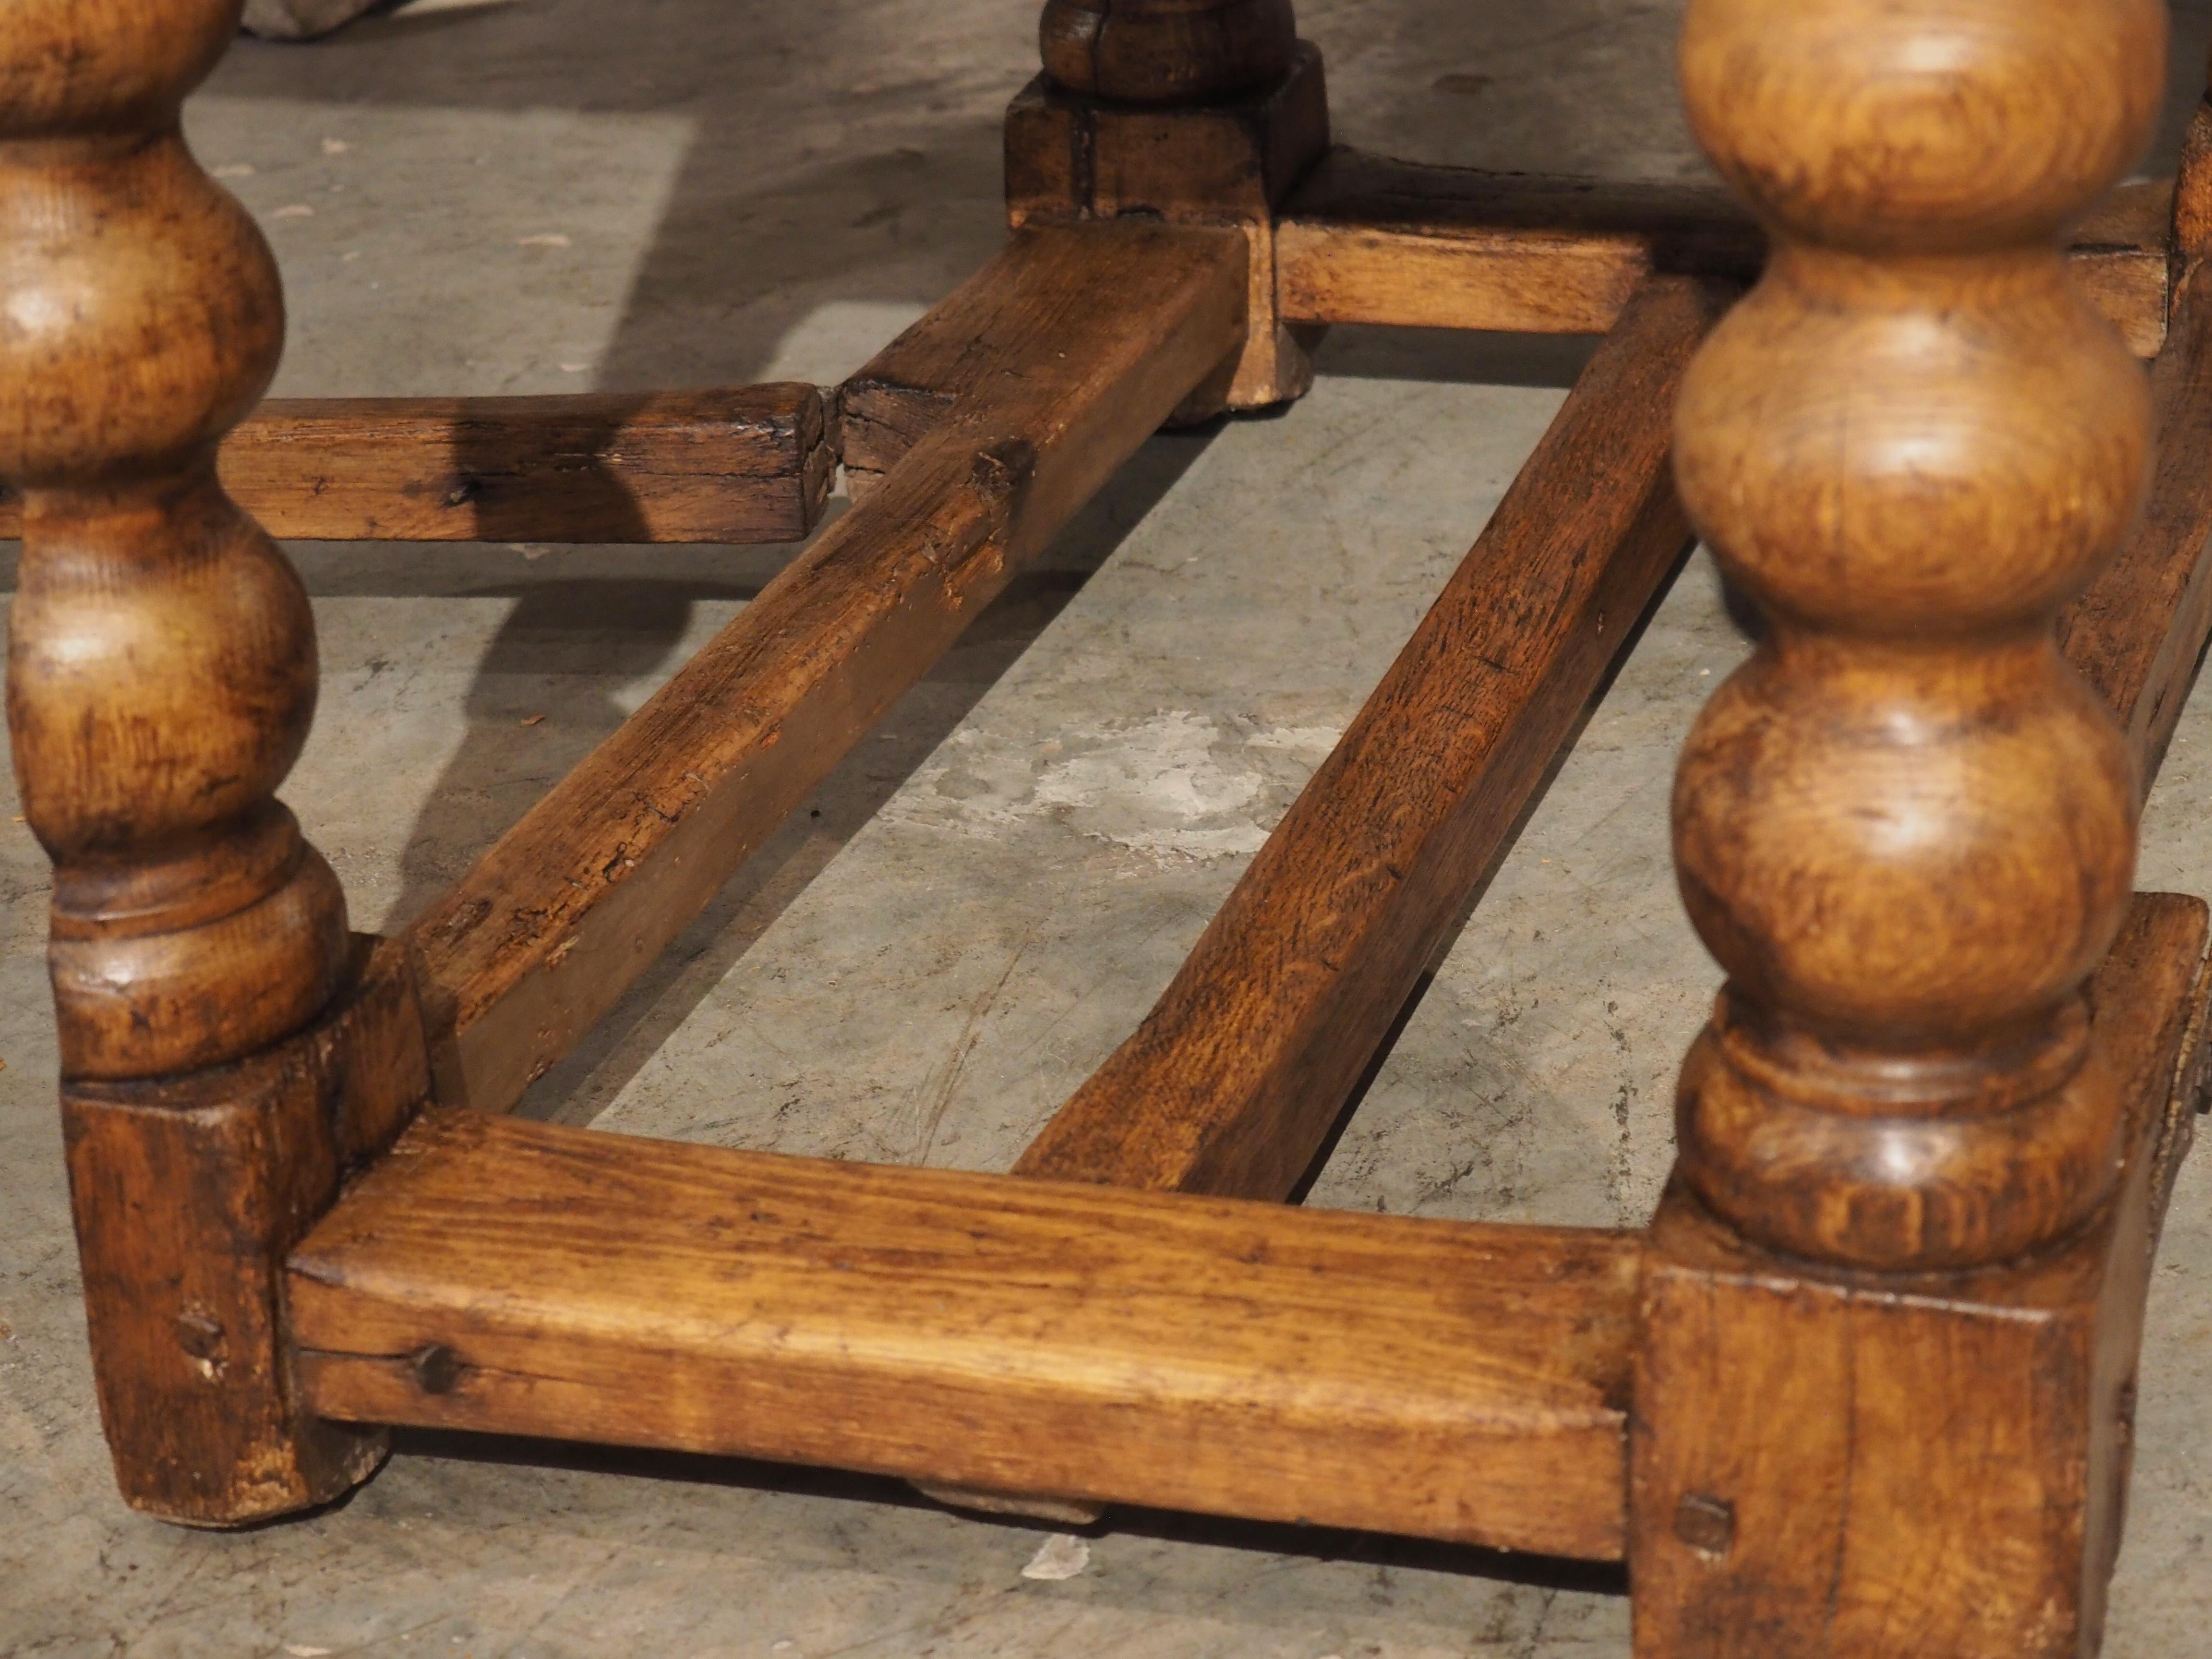 First introduced in England during the 16th century, a gate leg table is a small table that has drop leaves supported by pivoting legs. These legs are supported by a stretcher at the top and bottom, forming a stylized gate. Our oval gate leg table